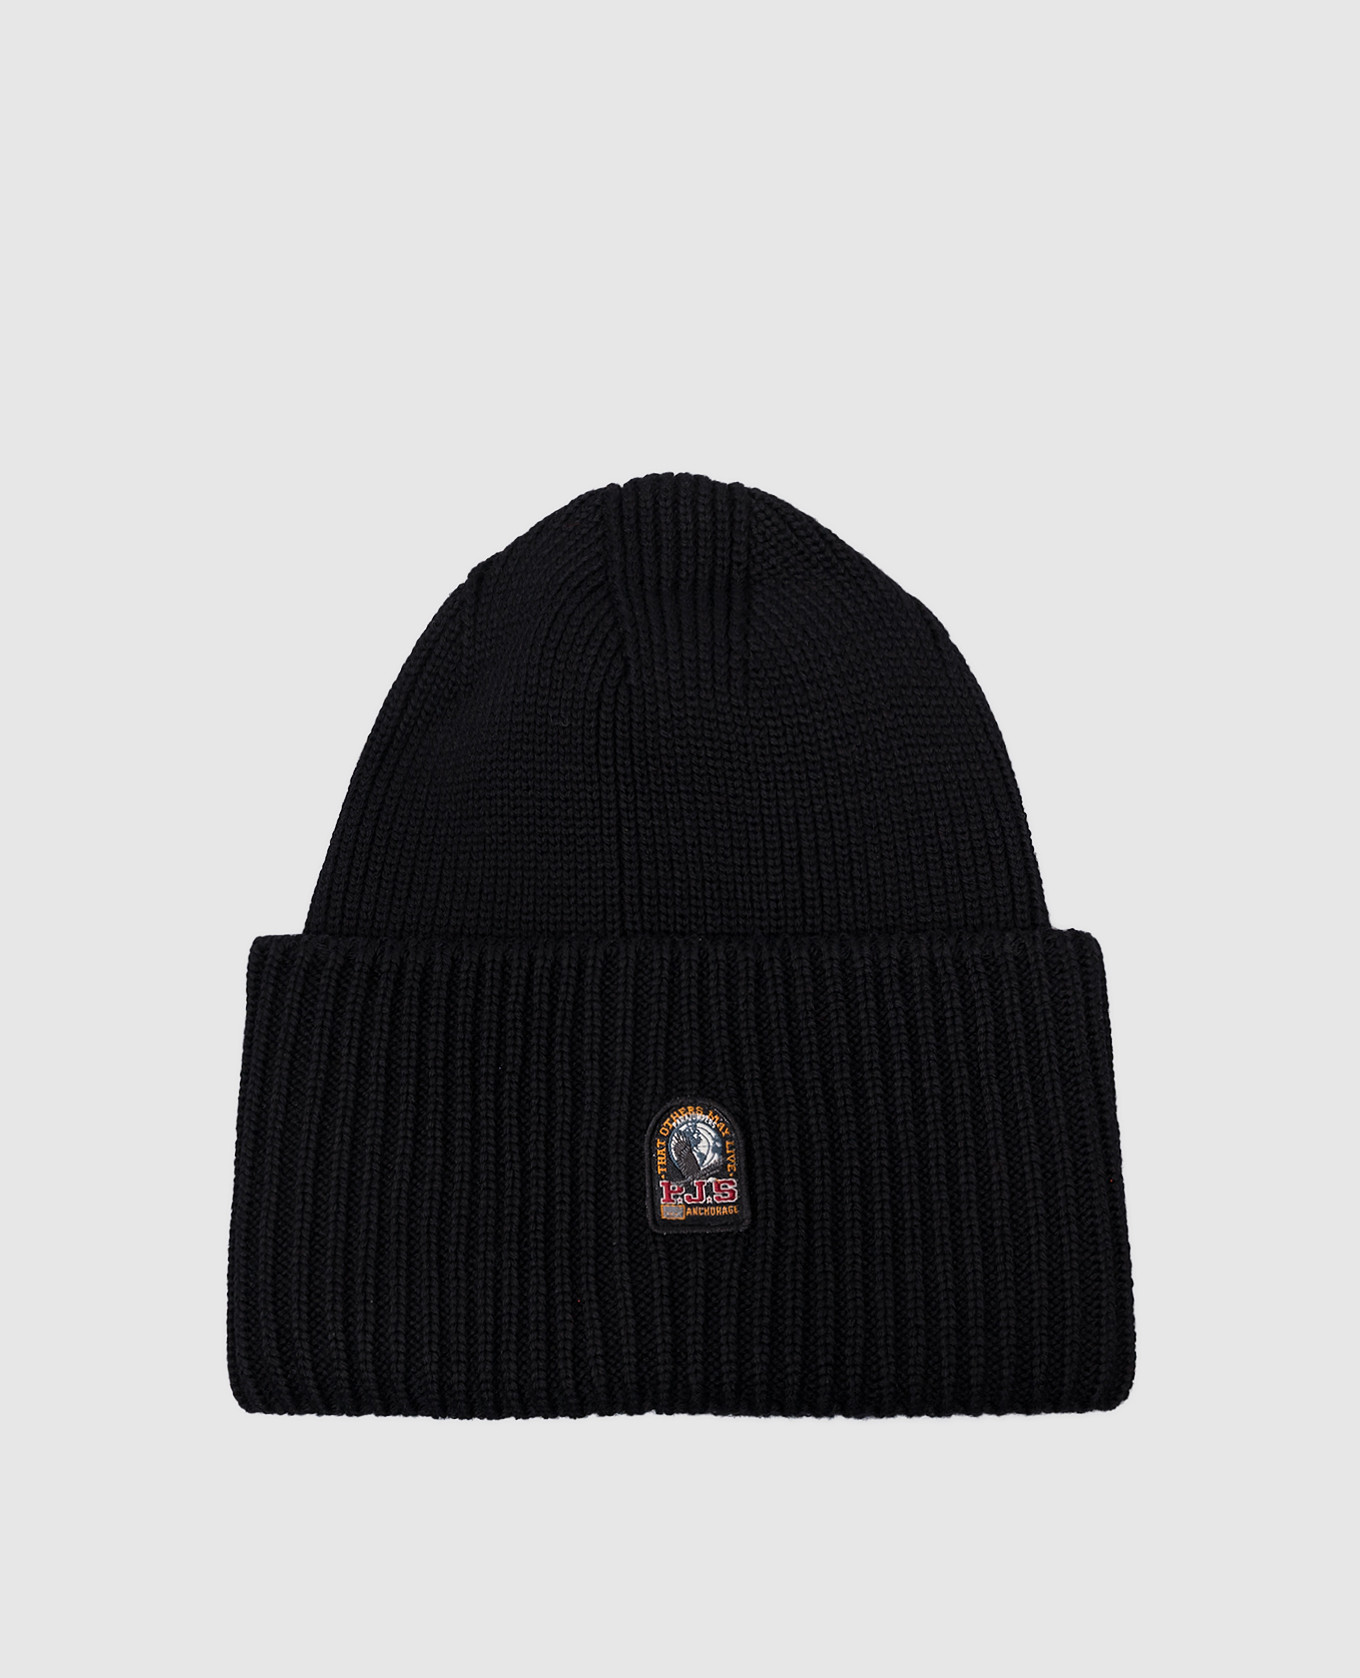 Basic black wool cap with logo patch